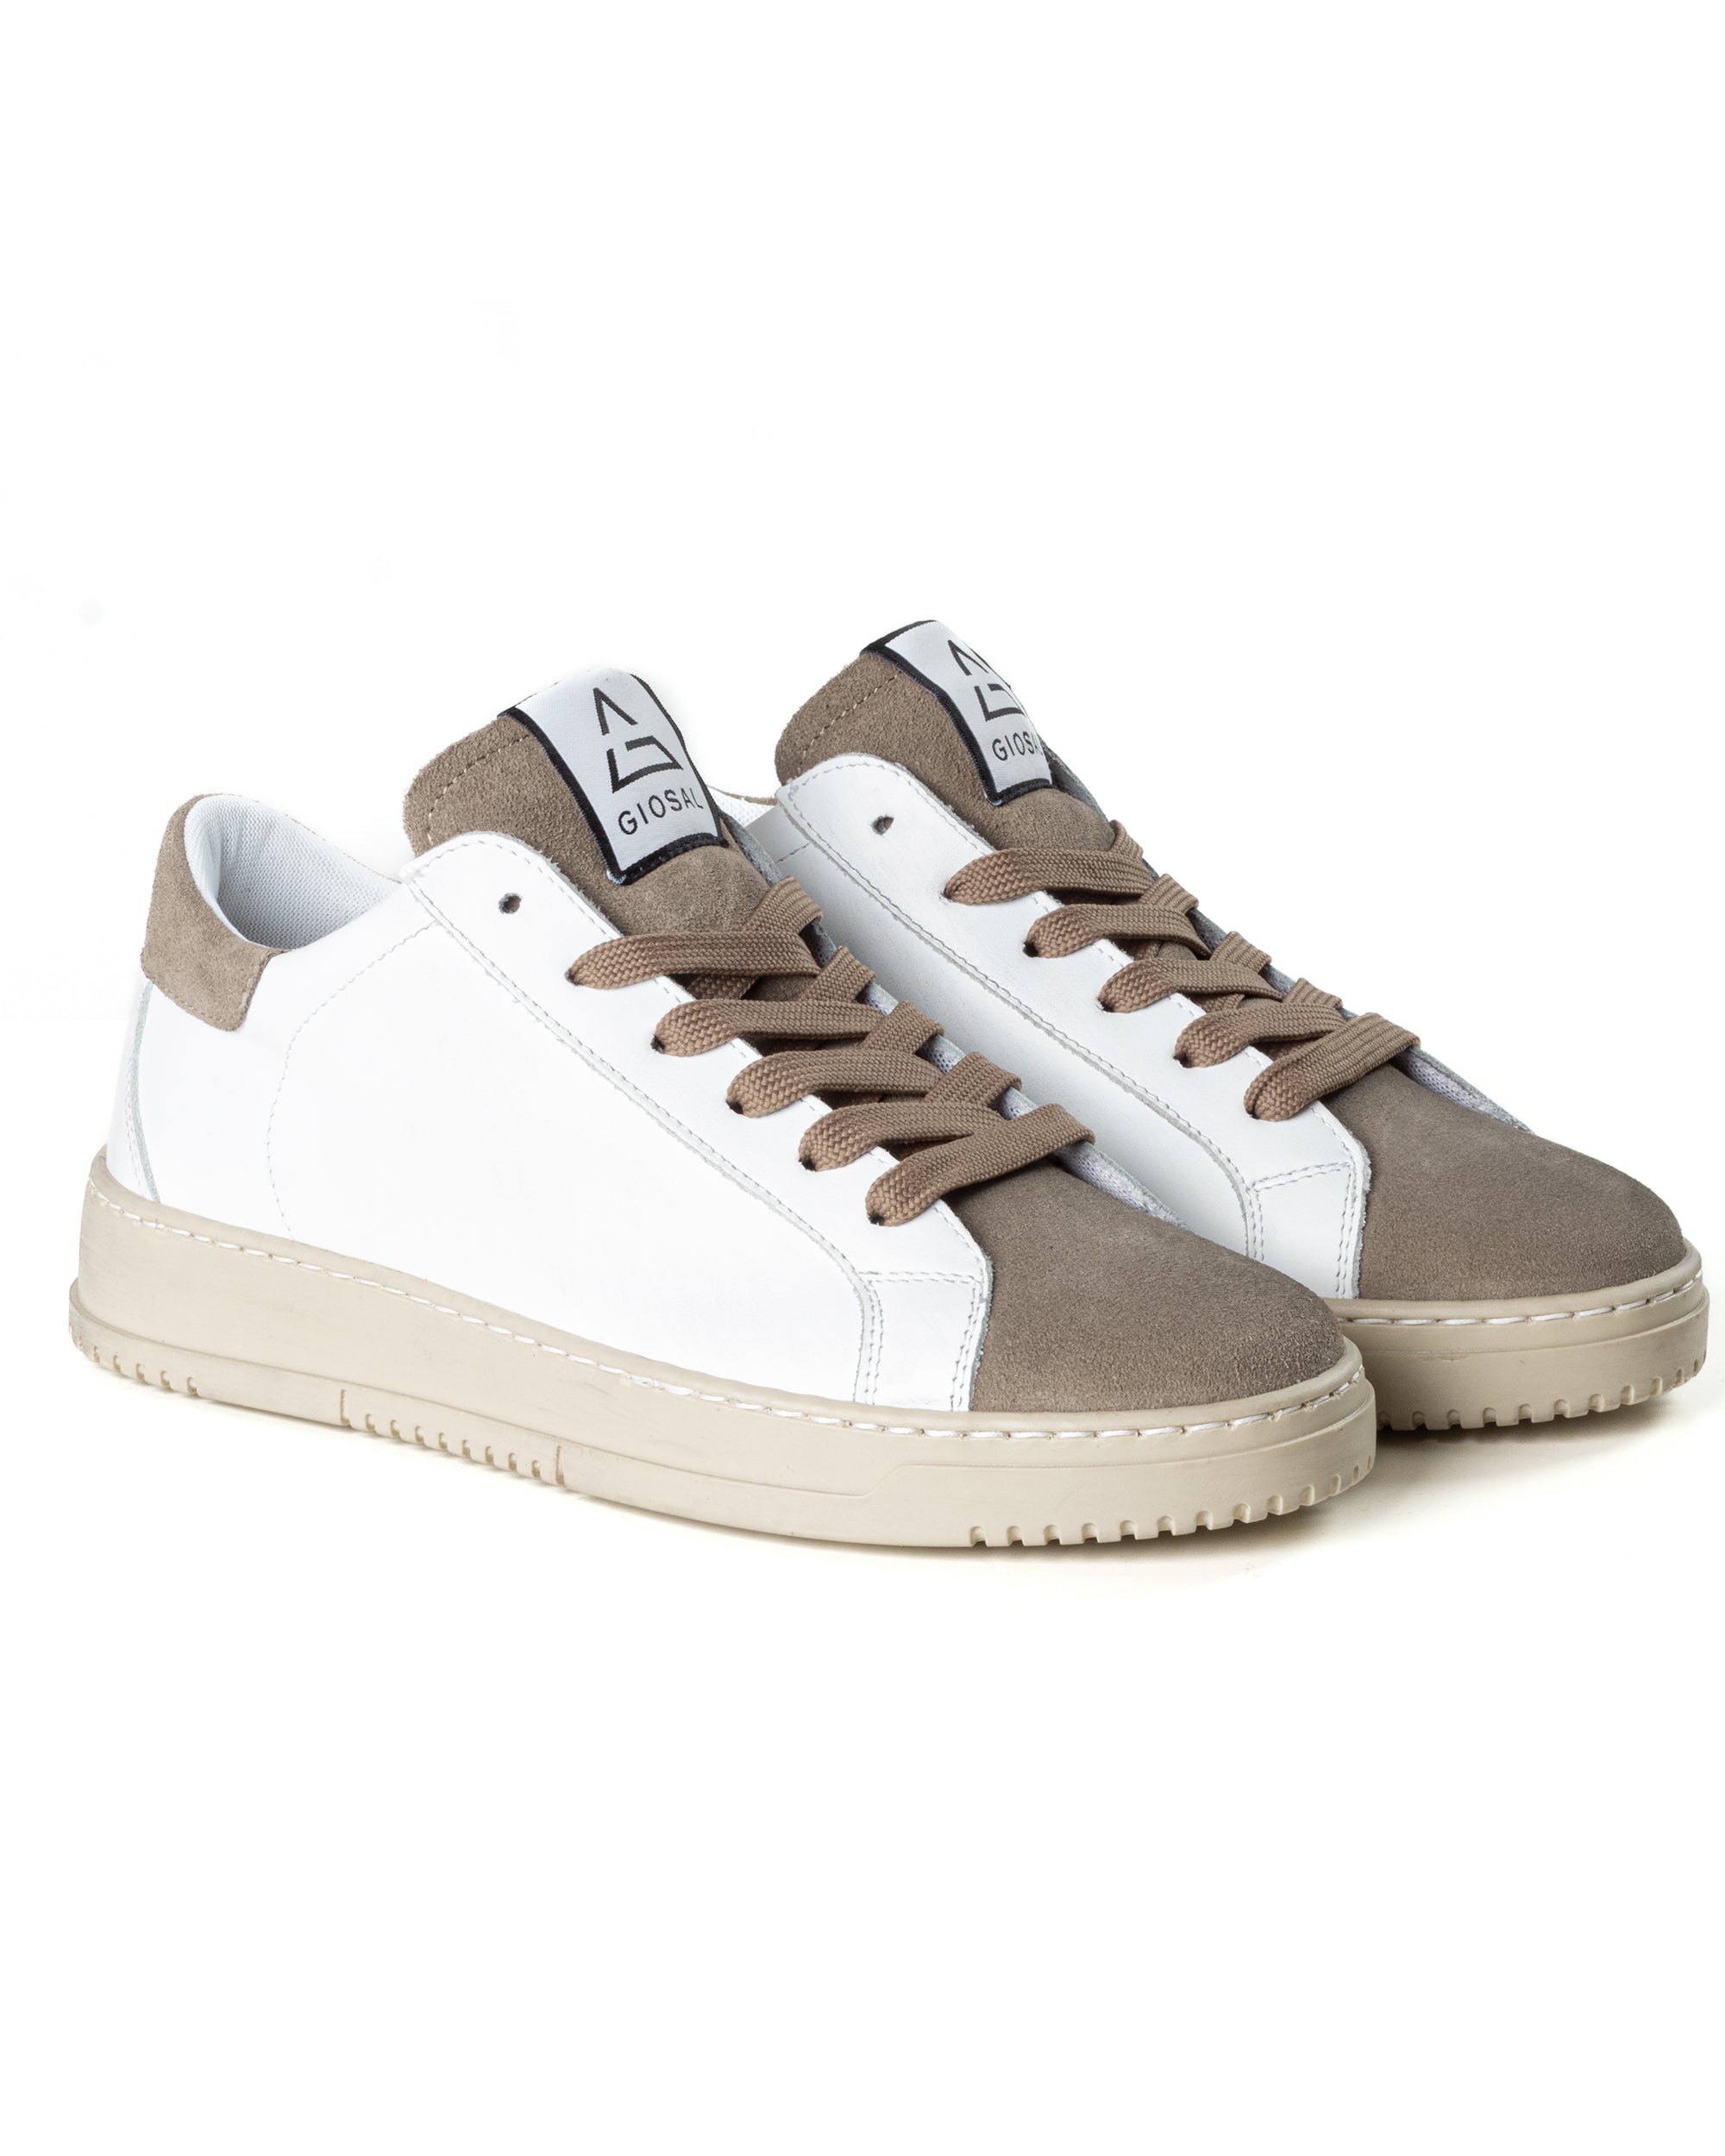 Men's Shoes White Casual Sports Sneakers Faux Leather Suede GIOSAL-S1185A